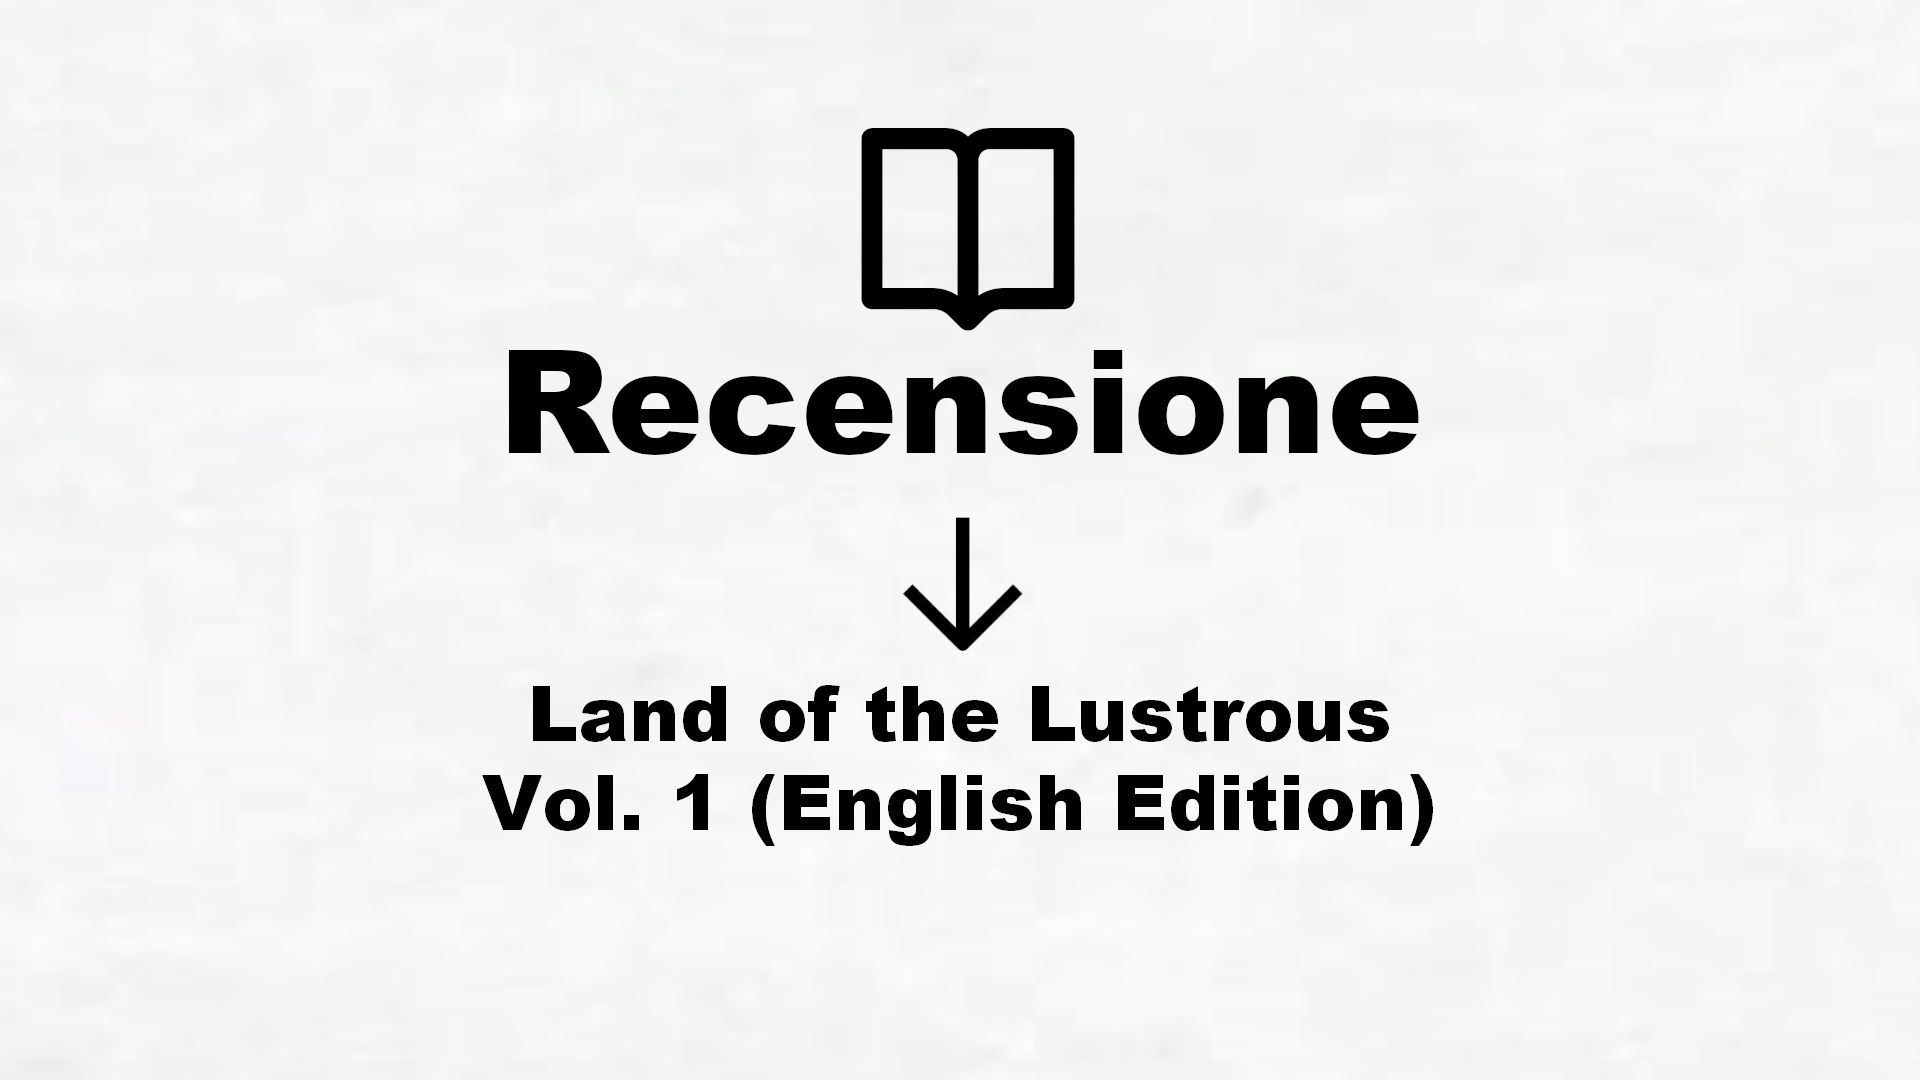 Land of the Lustrous Vol. 1 (English Edition) – Recensione Libro